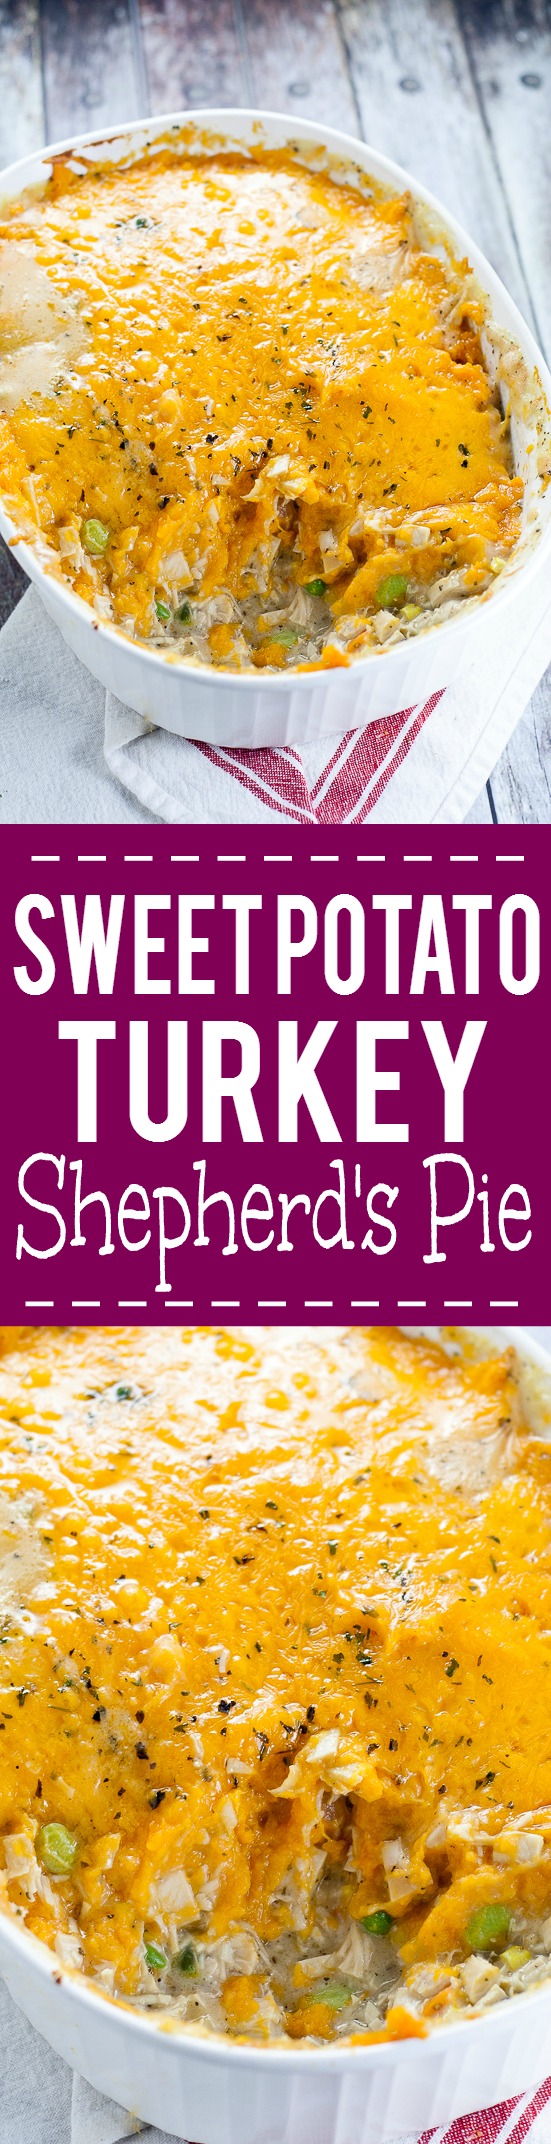 Sweet Potato Turkey Shepherd's Pie recipe with mashed sweet potatoes and turkey and veggies in a creamy gravy. Cozy, sweet and savory, this Sweet Potato Turkey Shepherd's Pie recipe is a great way to use up Thanksgiving leftovers in a warm delightful casserole.